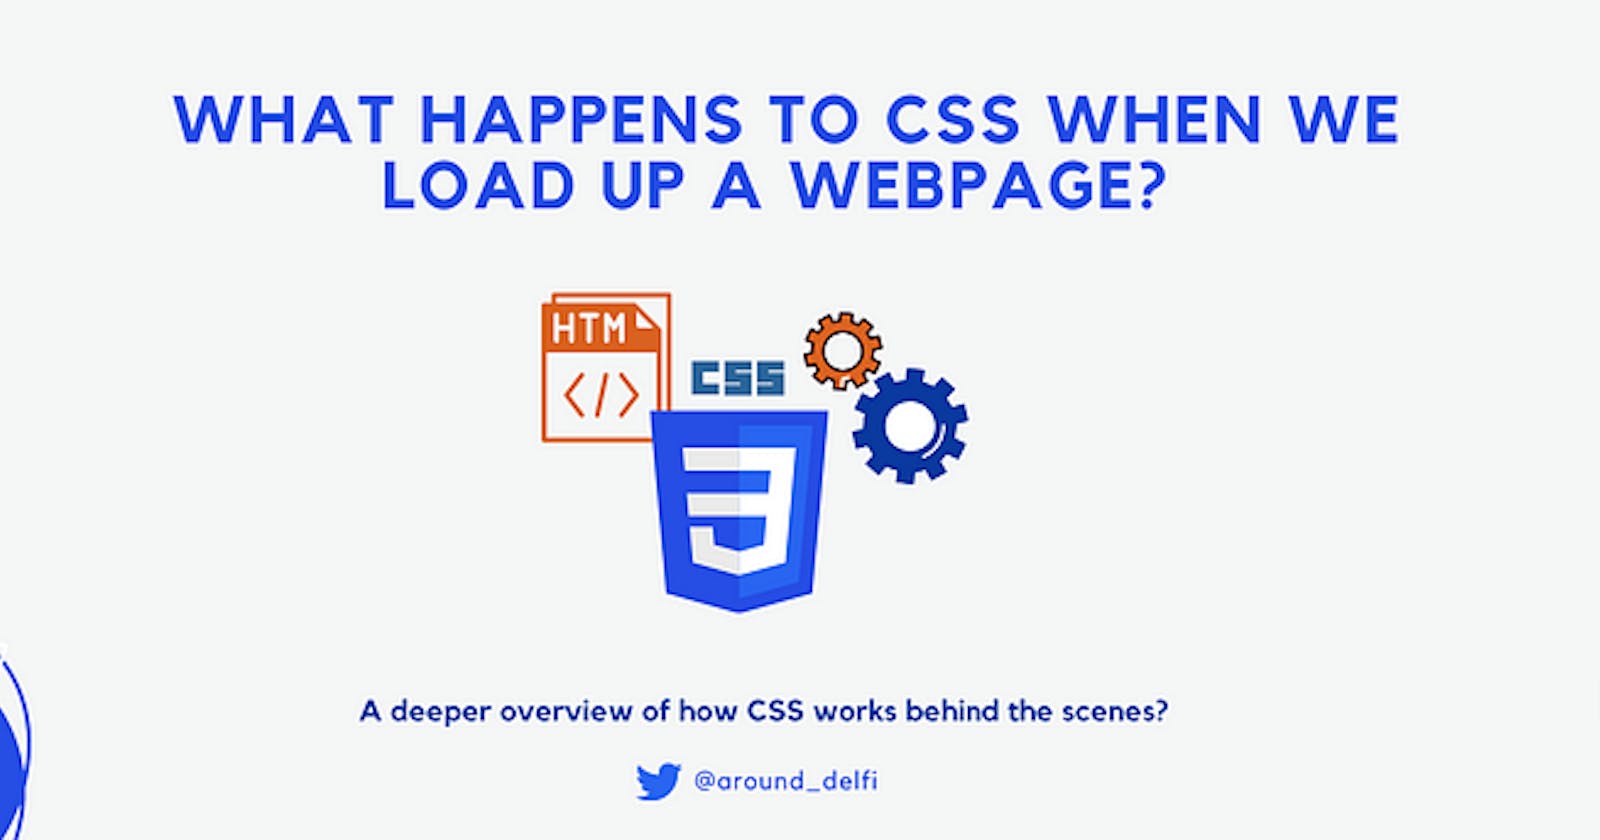 What happens to CSS when we load up a webpage?